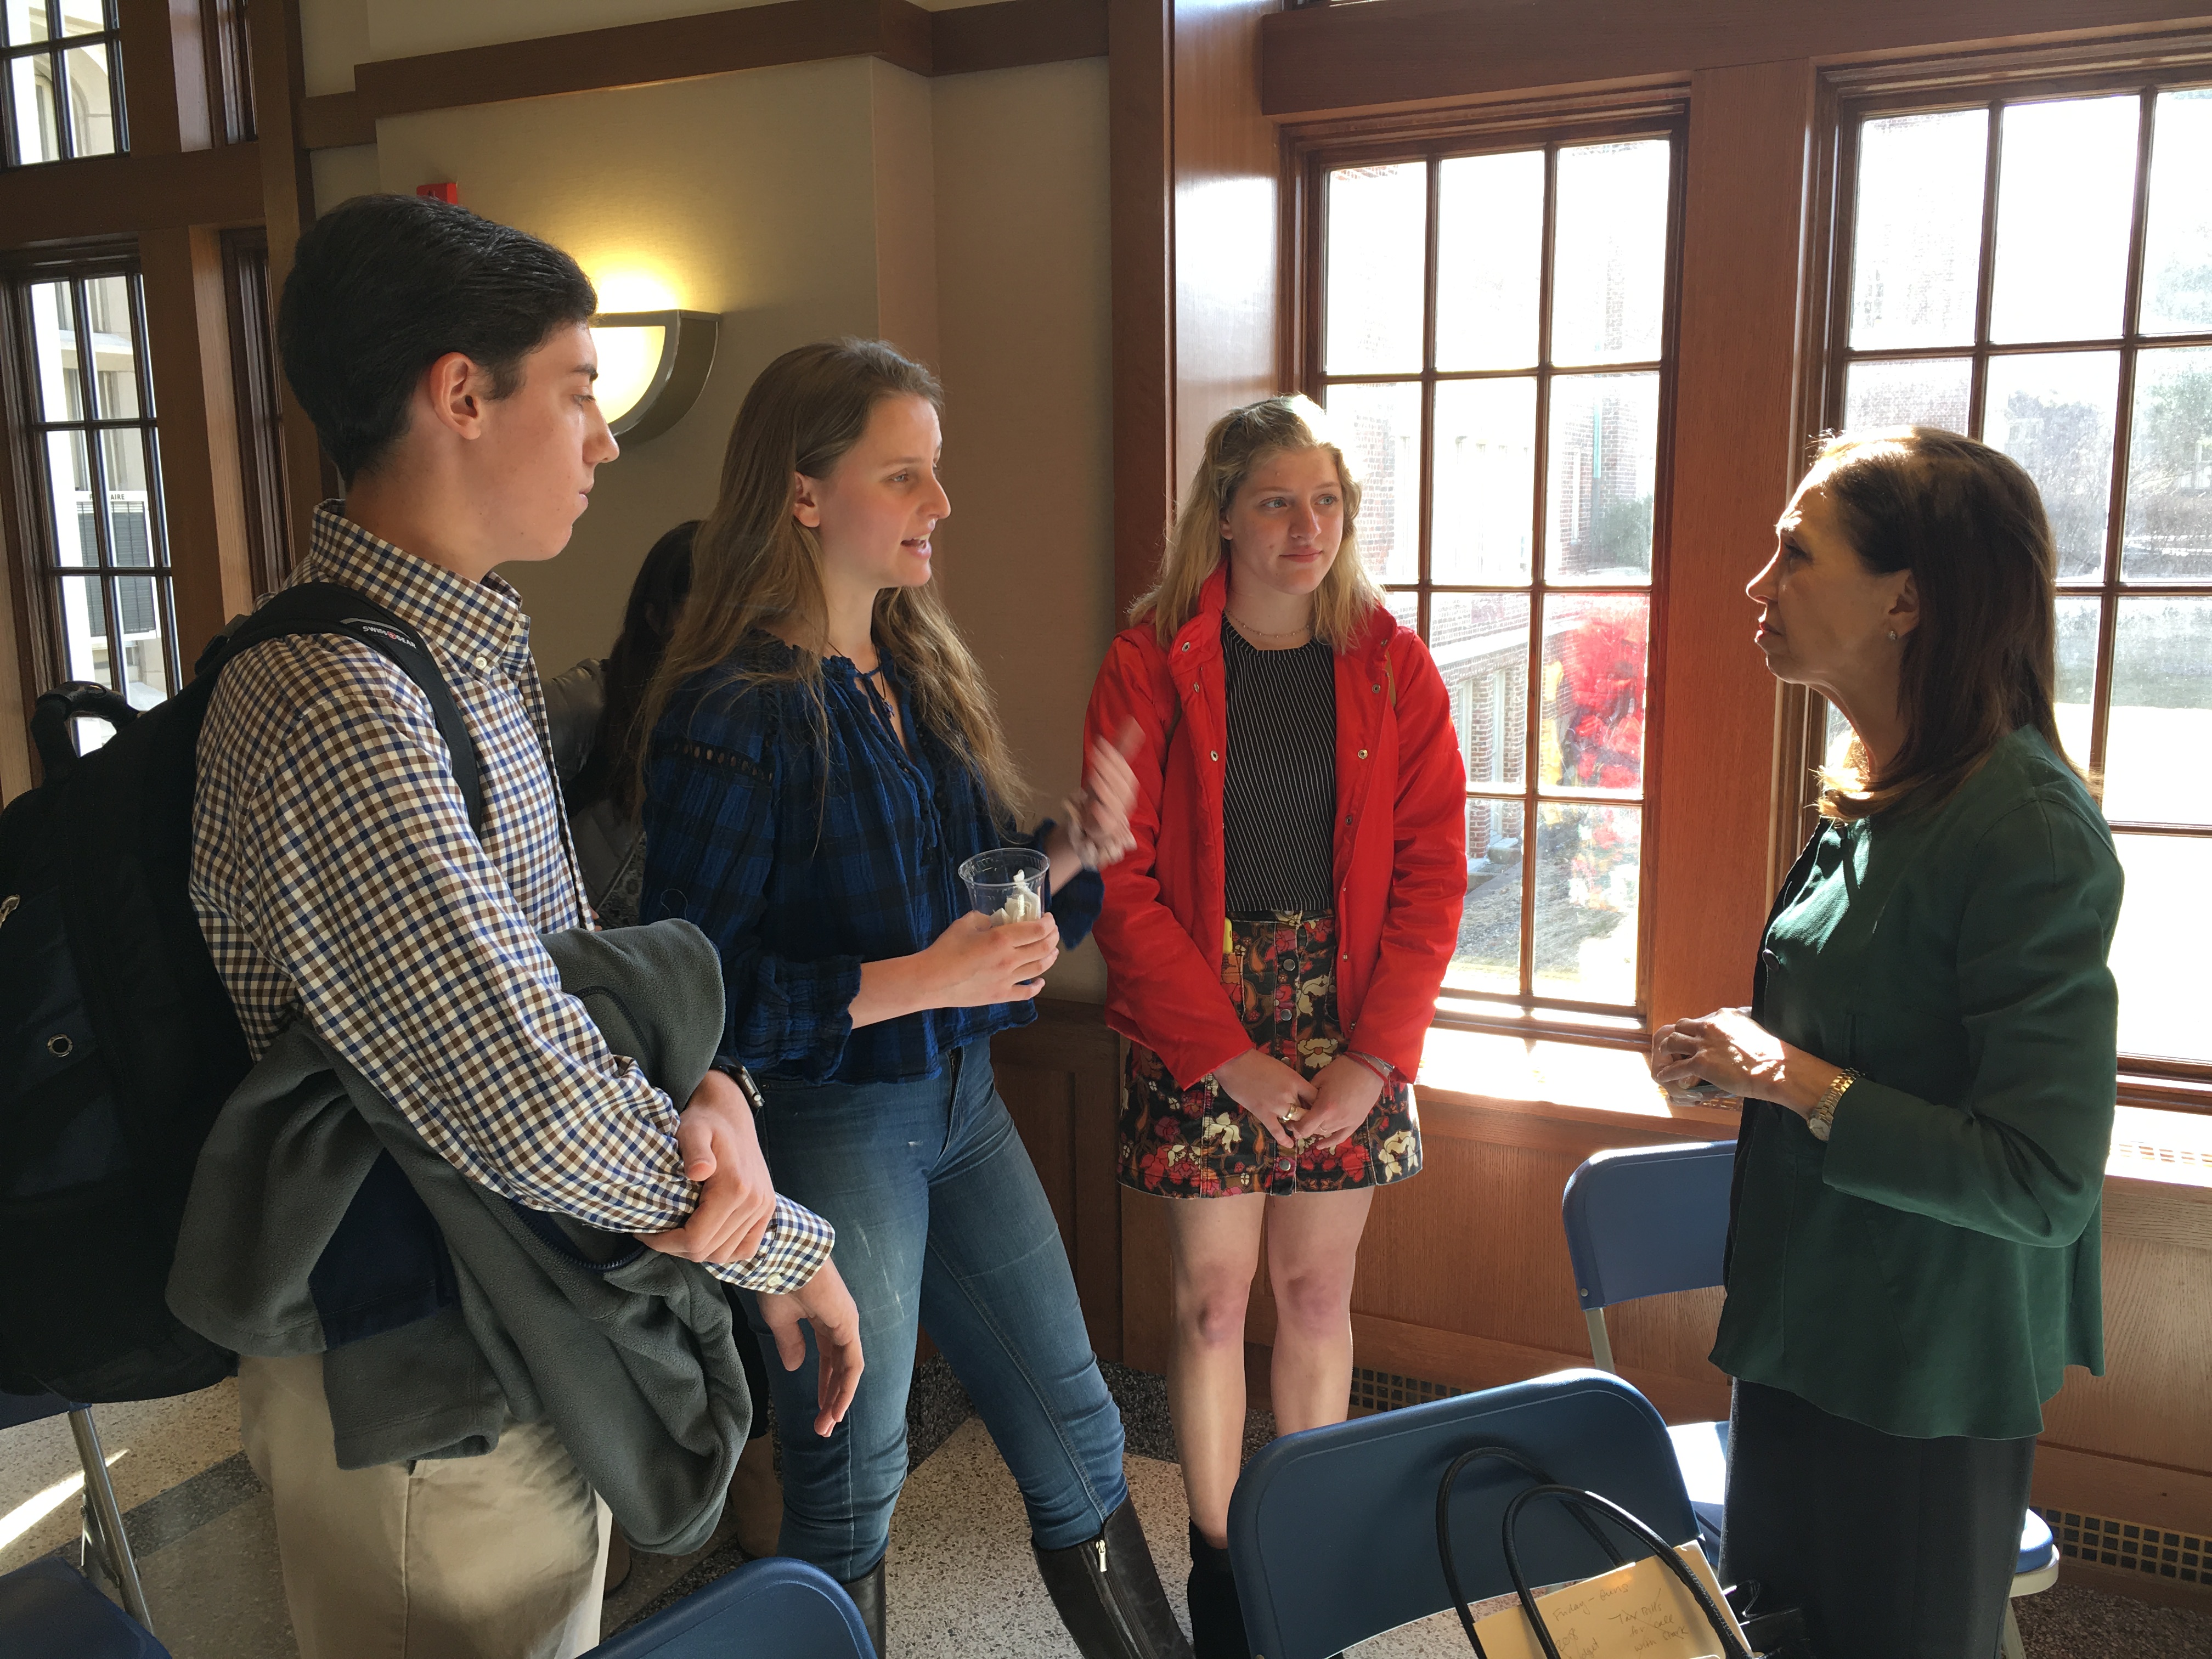 Assemblymember Amy Paulin joins Congressman Eliot Engel and Bronxville High School seniors in a conversation on gun violence and school safety on March 16, 2018.